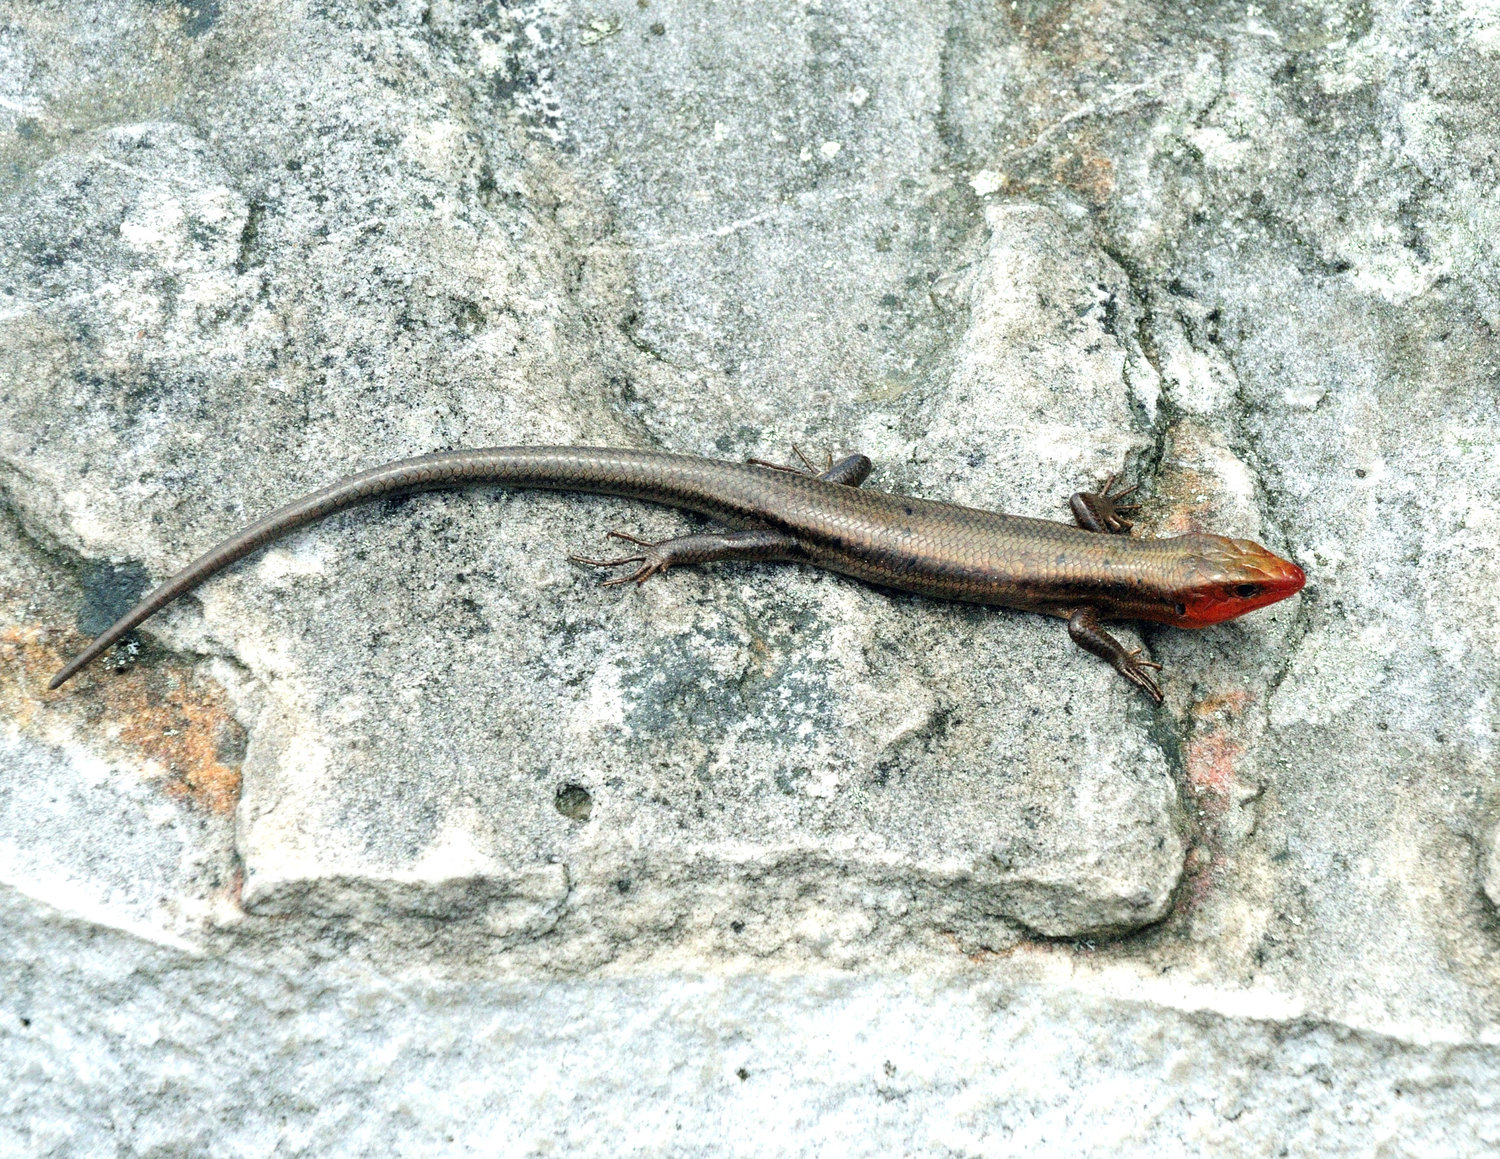 This is a male five-lined skink from the same area. During the breeding season, May and June, the male develops a red patch around its jaw; this is likely a tool to attract females. Later, the female lays up to 15 eggs under a rock or log and will tend to them until they hatch.